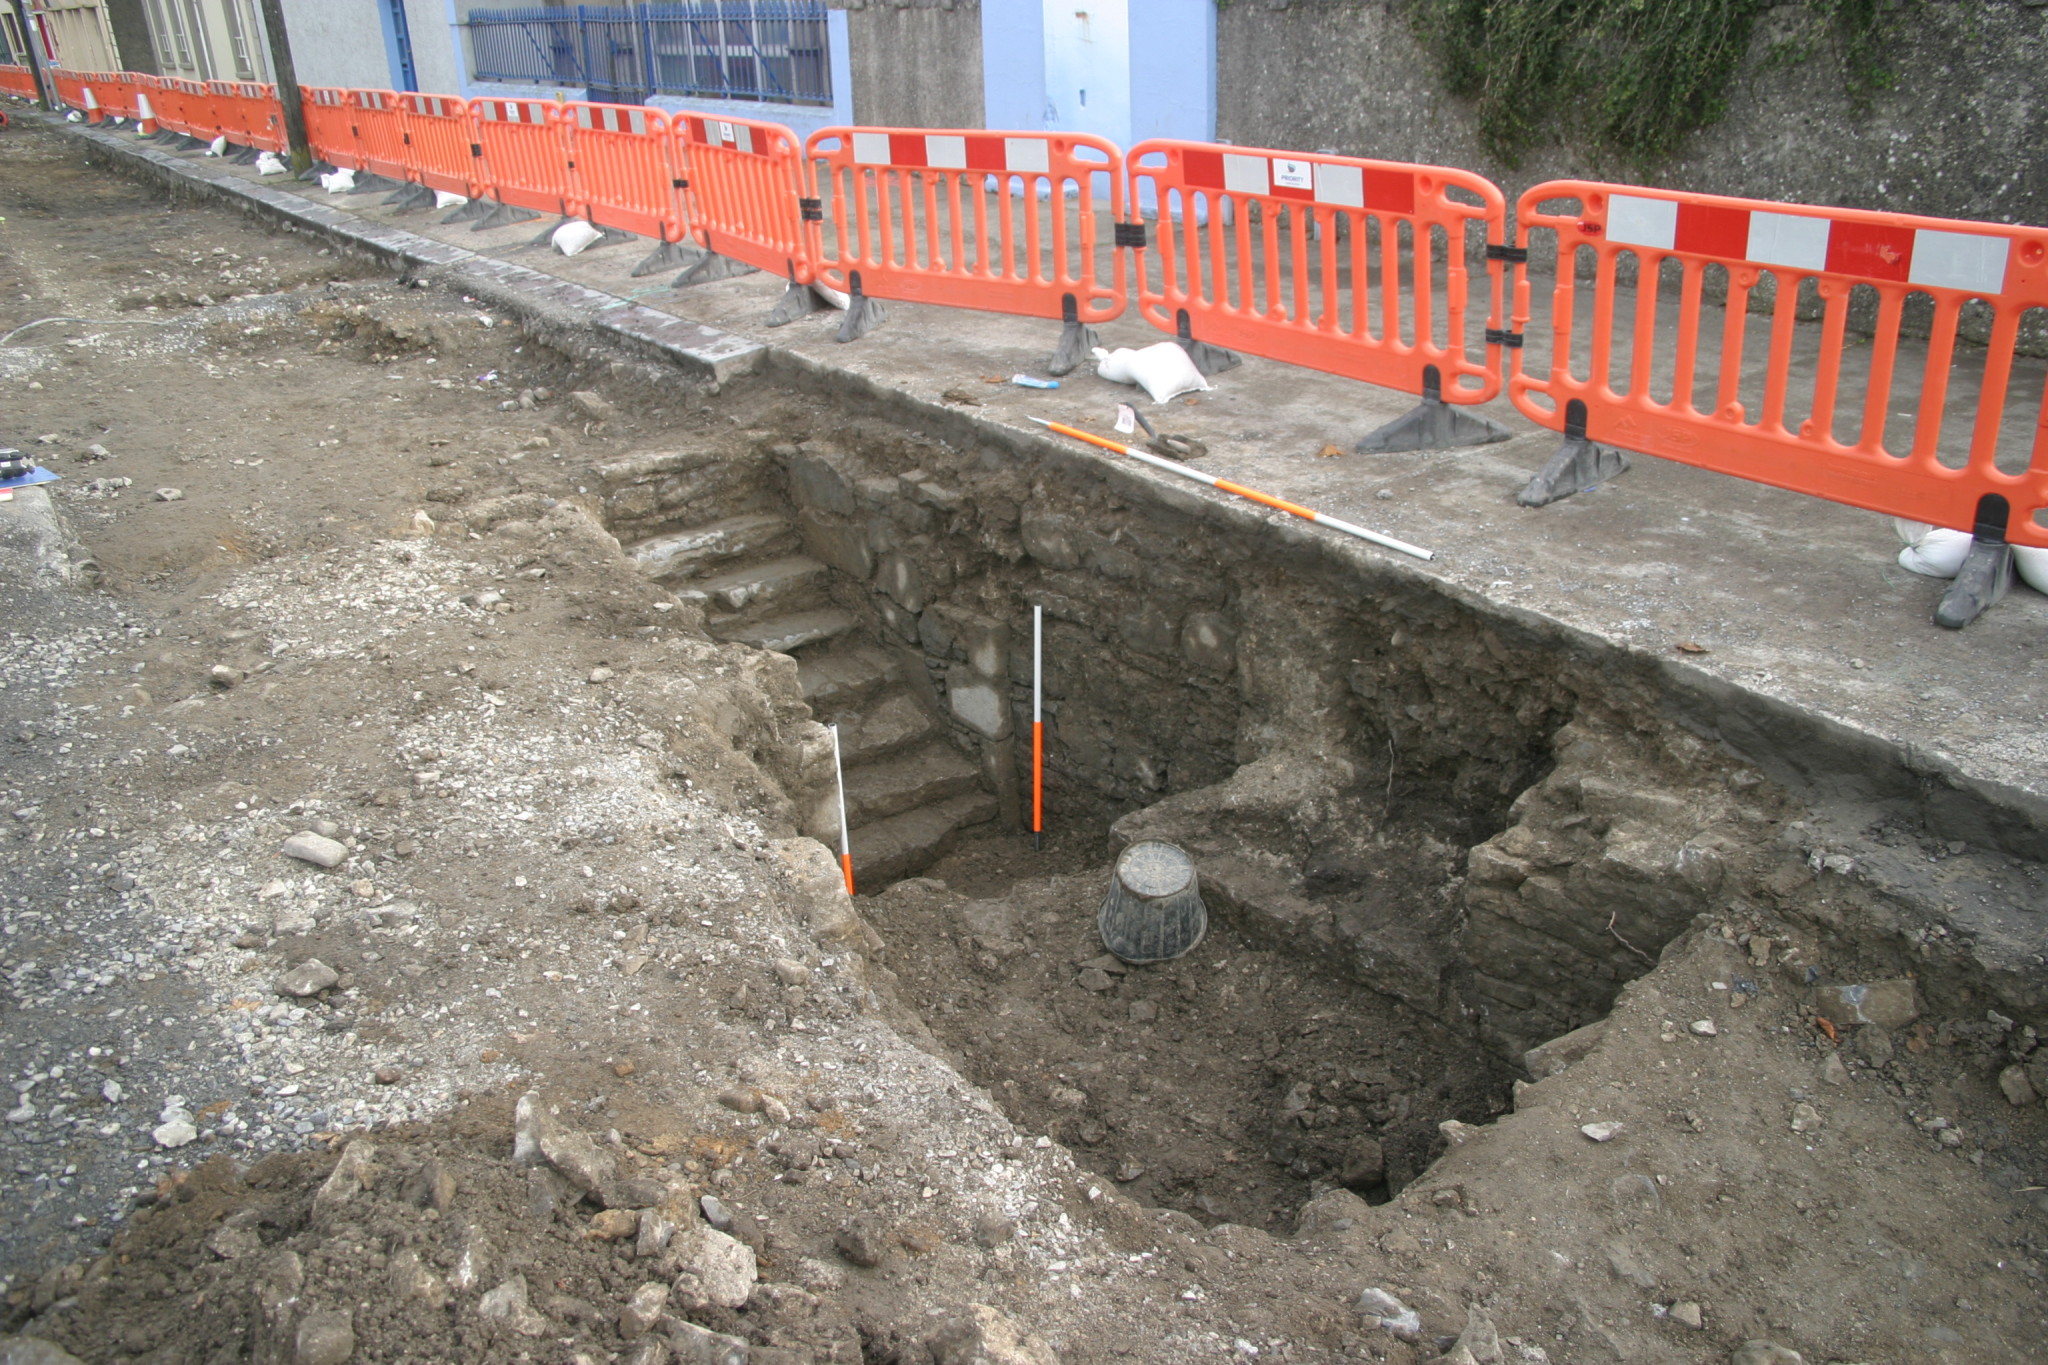 Another view of the cellar uncovered during the excavations at Buttevant (Copyright Rubicon Heritage)